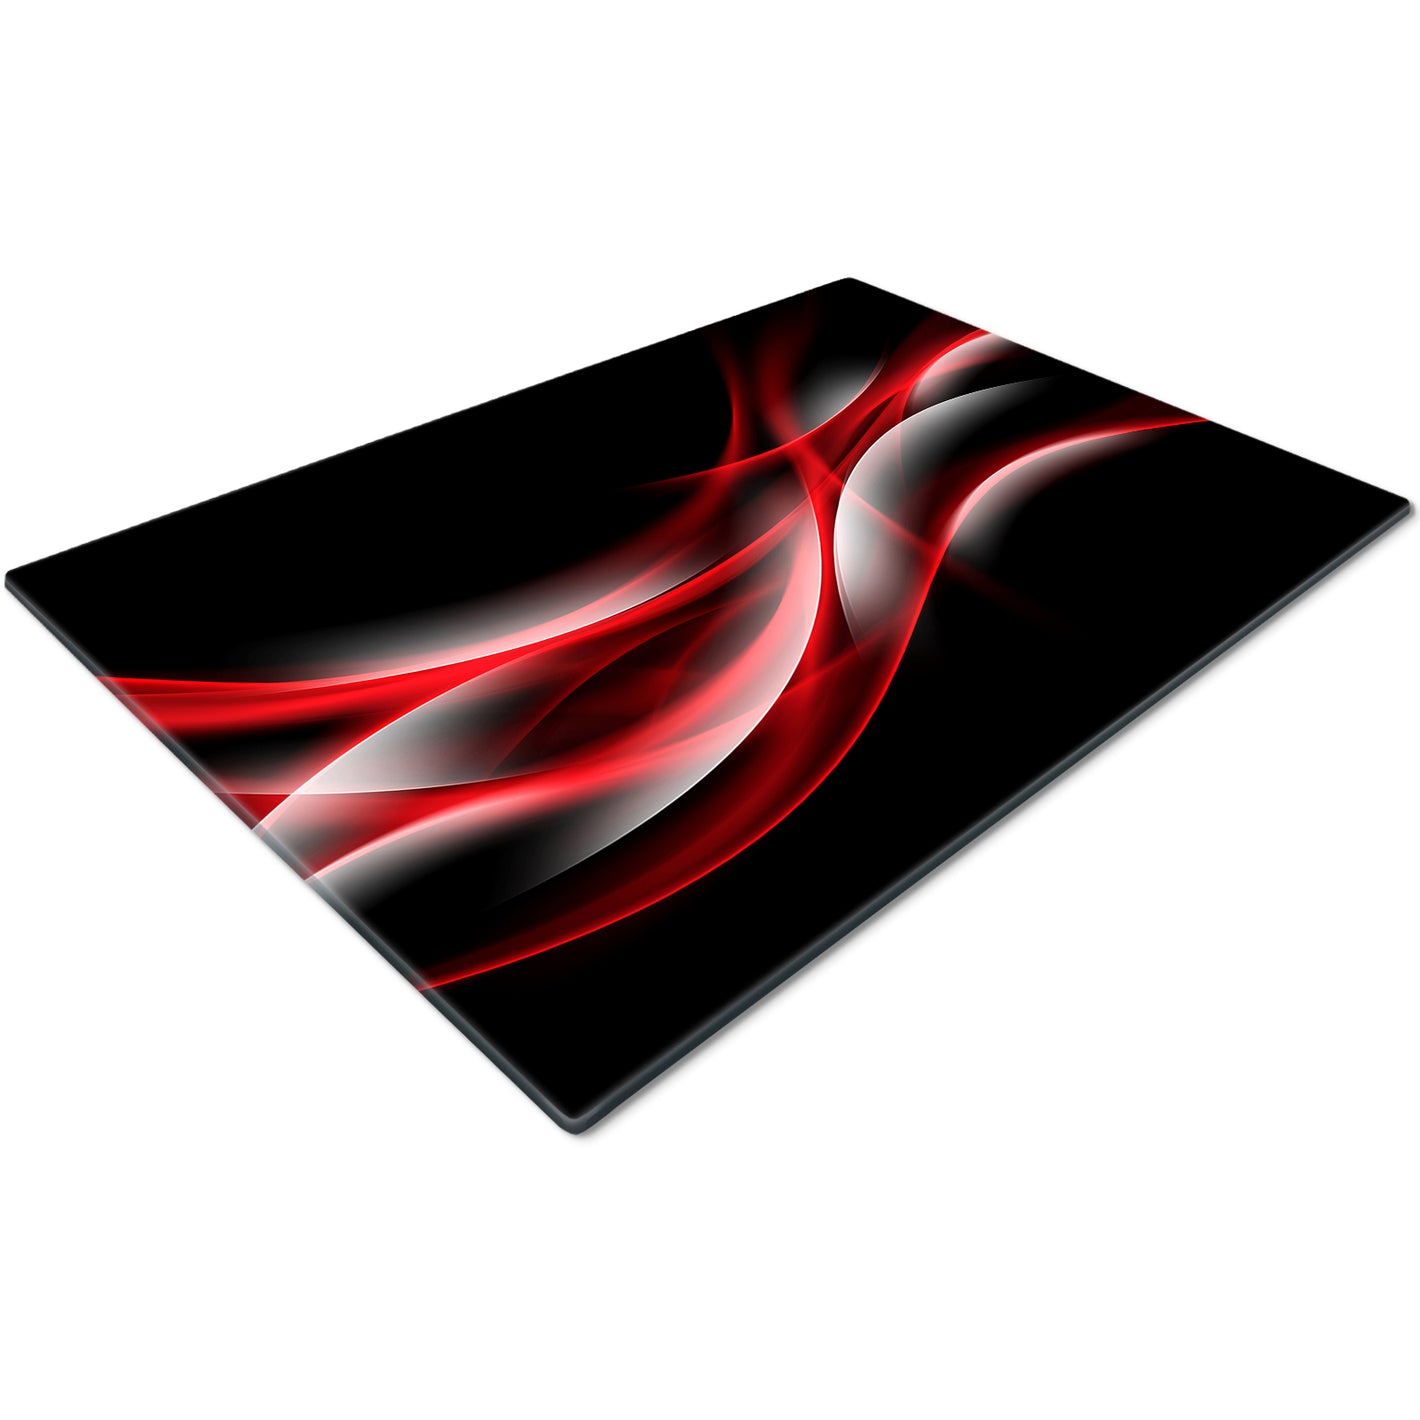 Glass Chopping Board for Kitchen in Black Red White design